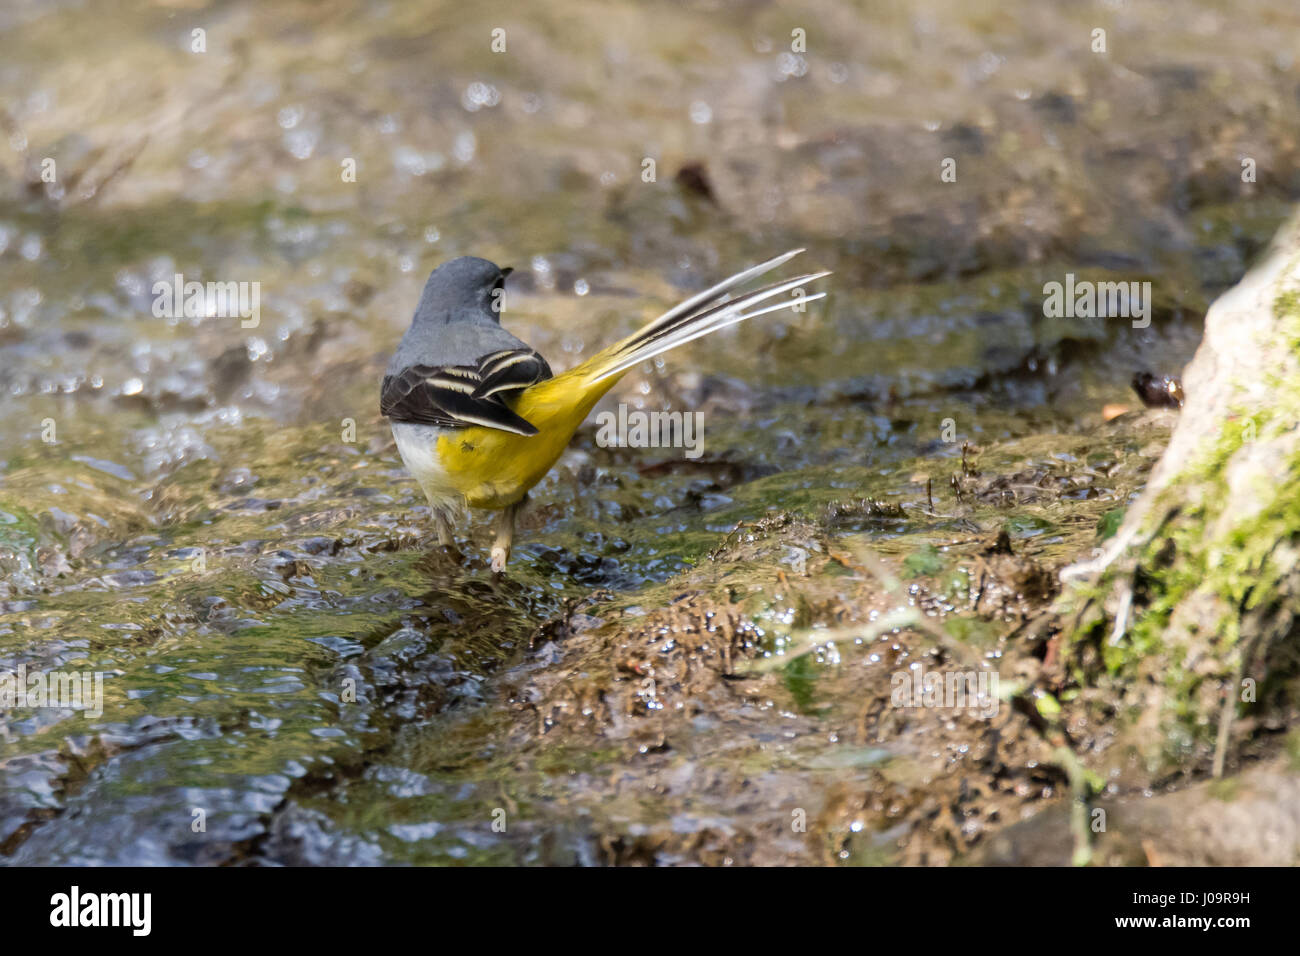 Grey wagtail (Motacilla cinerea) in river. Colourful bird in the family Motacillidae, showing long tail and yellow underparts Stock Photo